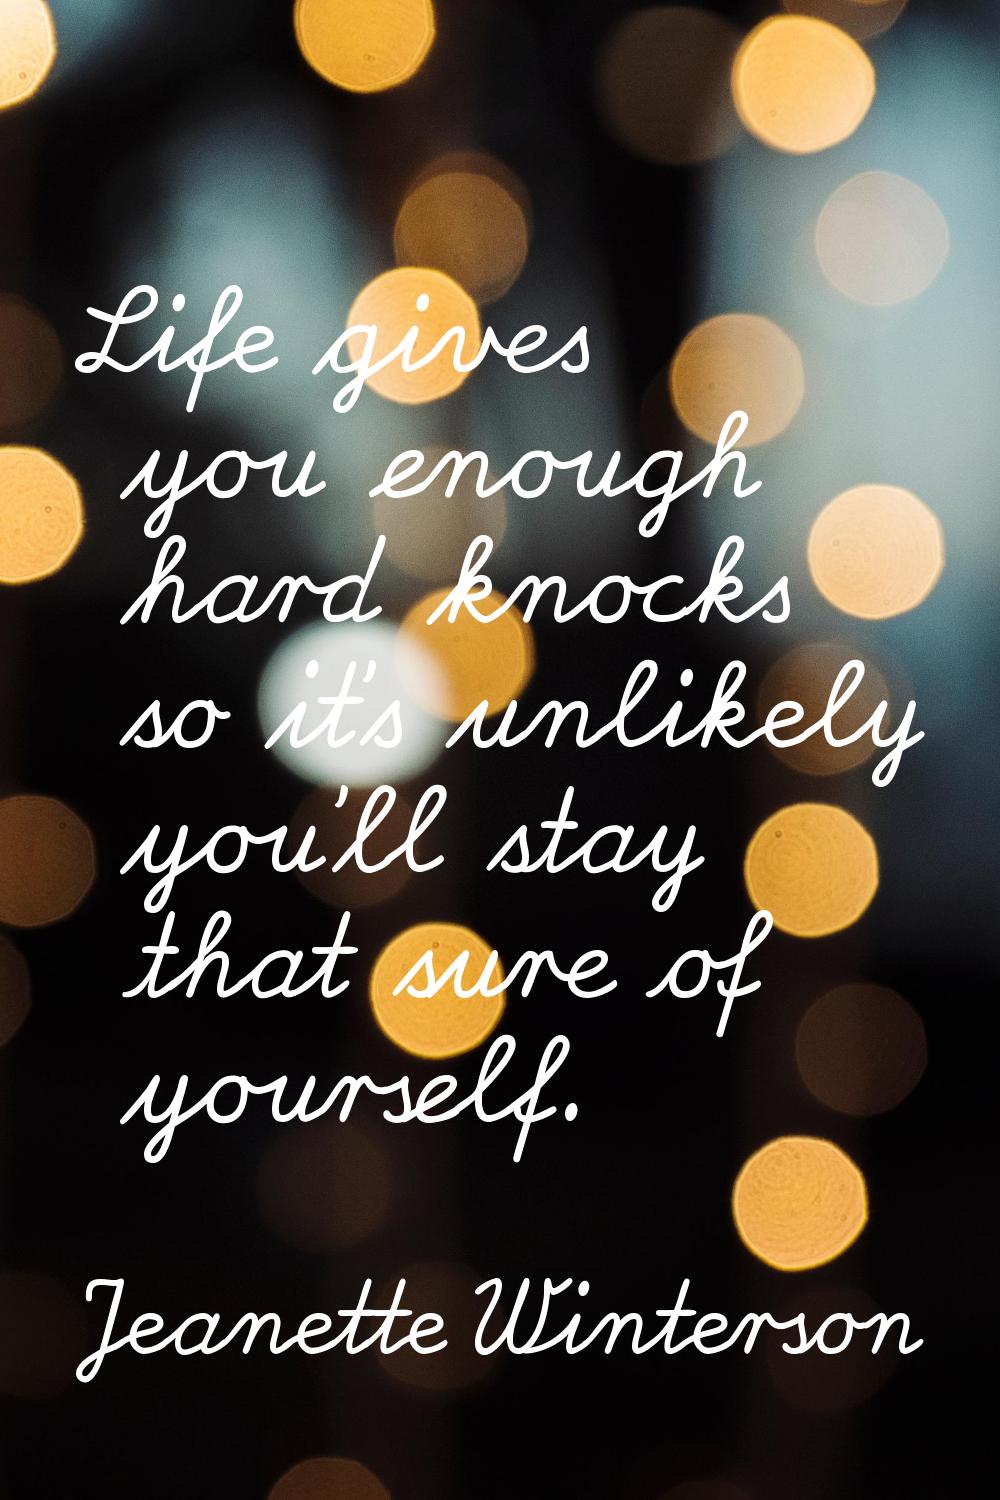 Life gives you enough hard knocks so it's unlikely you'll stay that sure of yourself.